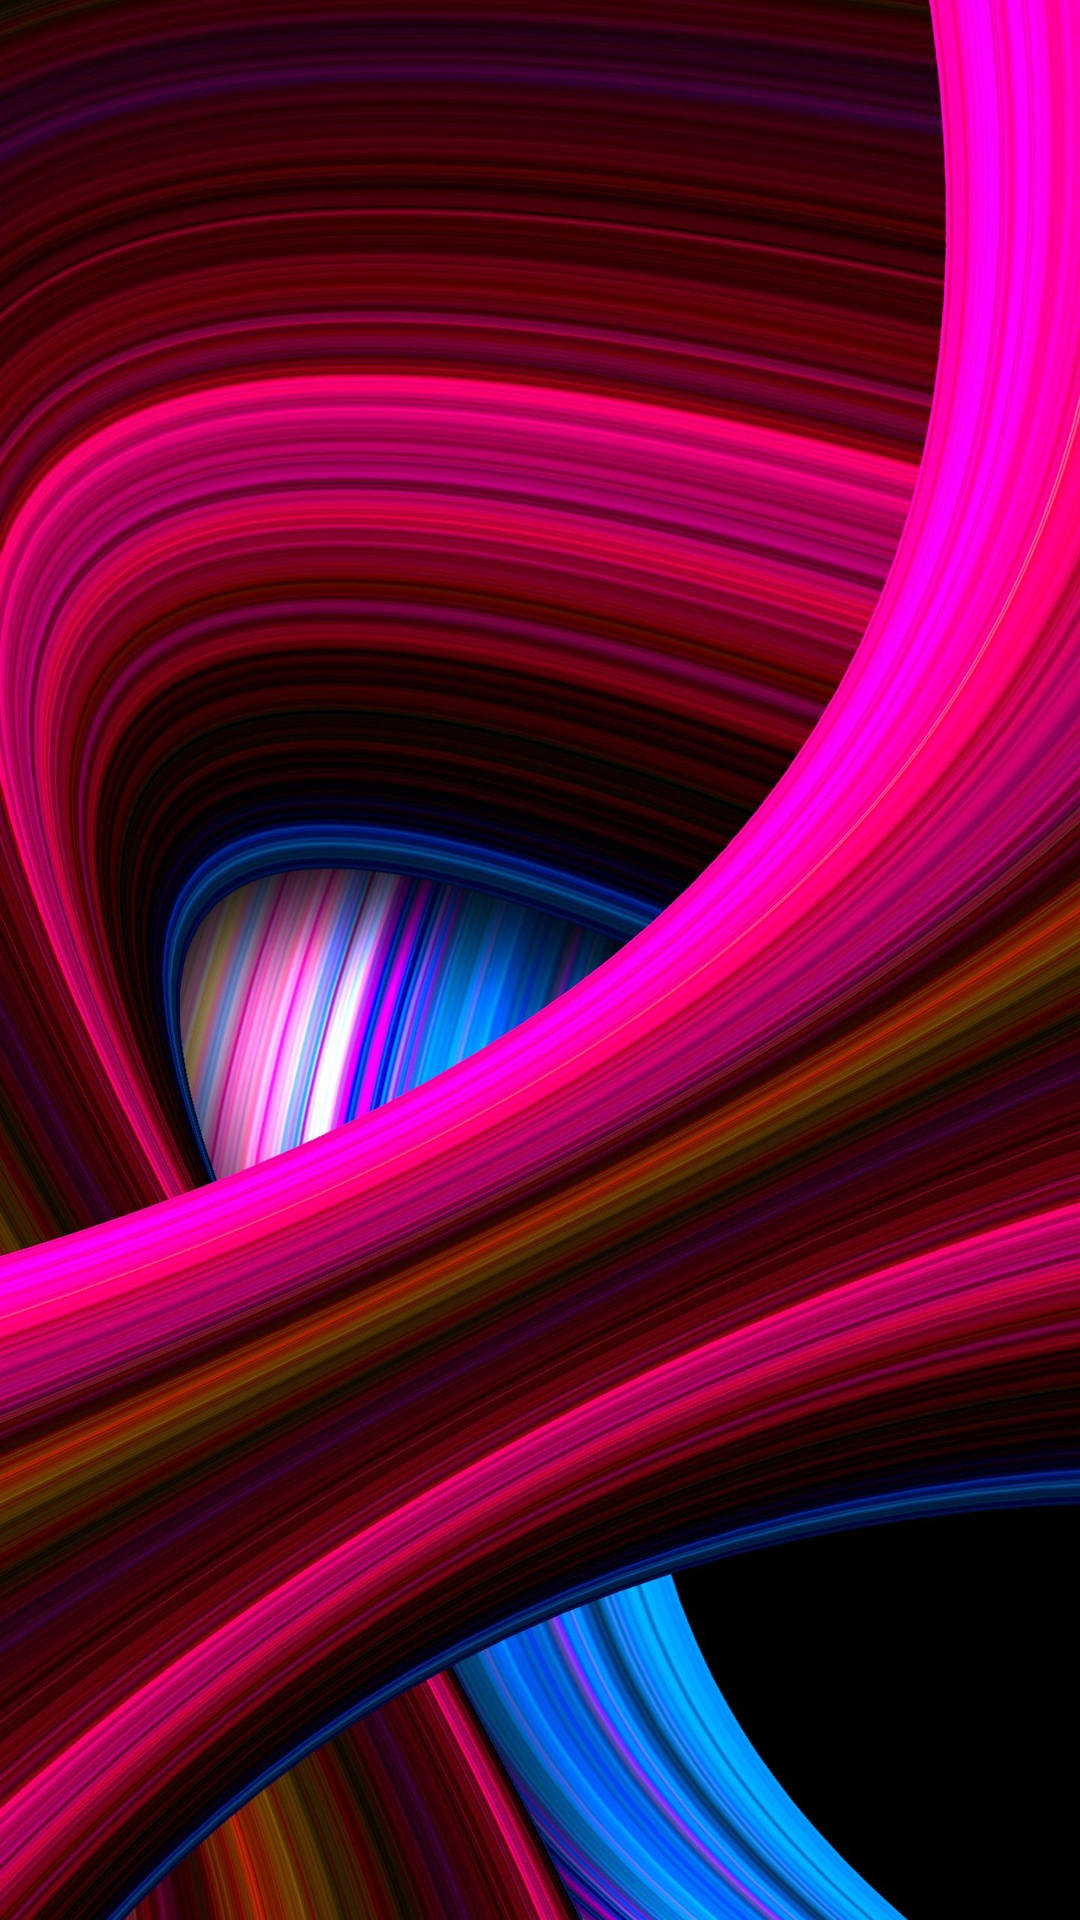 Samsung Galaxy S20 with Vibrant Waves Wallpaper Wallpaper